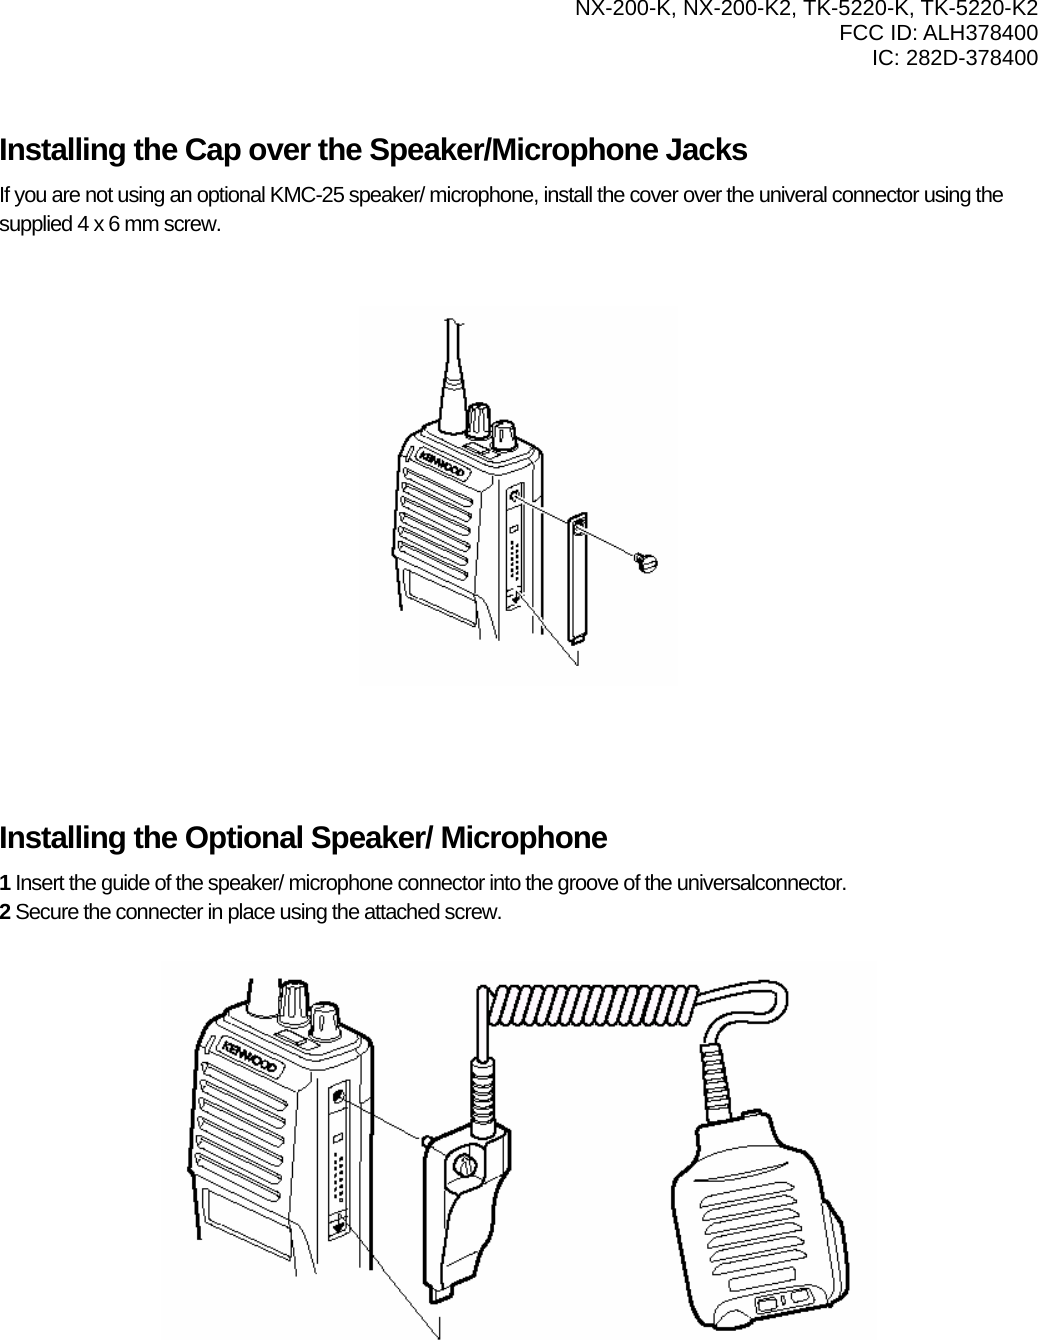   NX-200-K, NX-200-K2, TK-5220-K, TK-5220-K2 FCC ID: ALH378400 IC: 282D-378400    Installing the Cap over the Speaker/Microphone Jacks If you are not using an optional KMC-25 speaker/ microphone, install the cover over the univeral connector using the supplied 4 x 6 mm screw.             Installing the Optional Speaker/ Microphone 1 Insert the guide of the speaker/ microphone connector into the groove of the universalconnector. 2 Secure the connecter in place using the attached screw.            